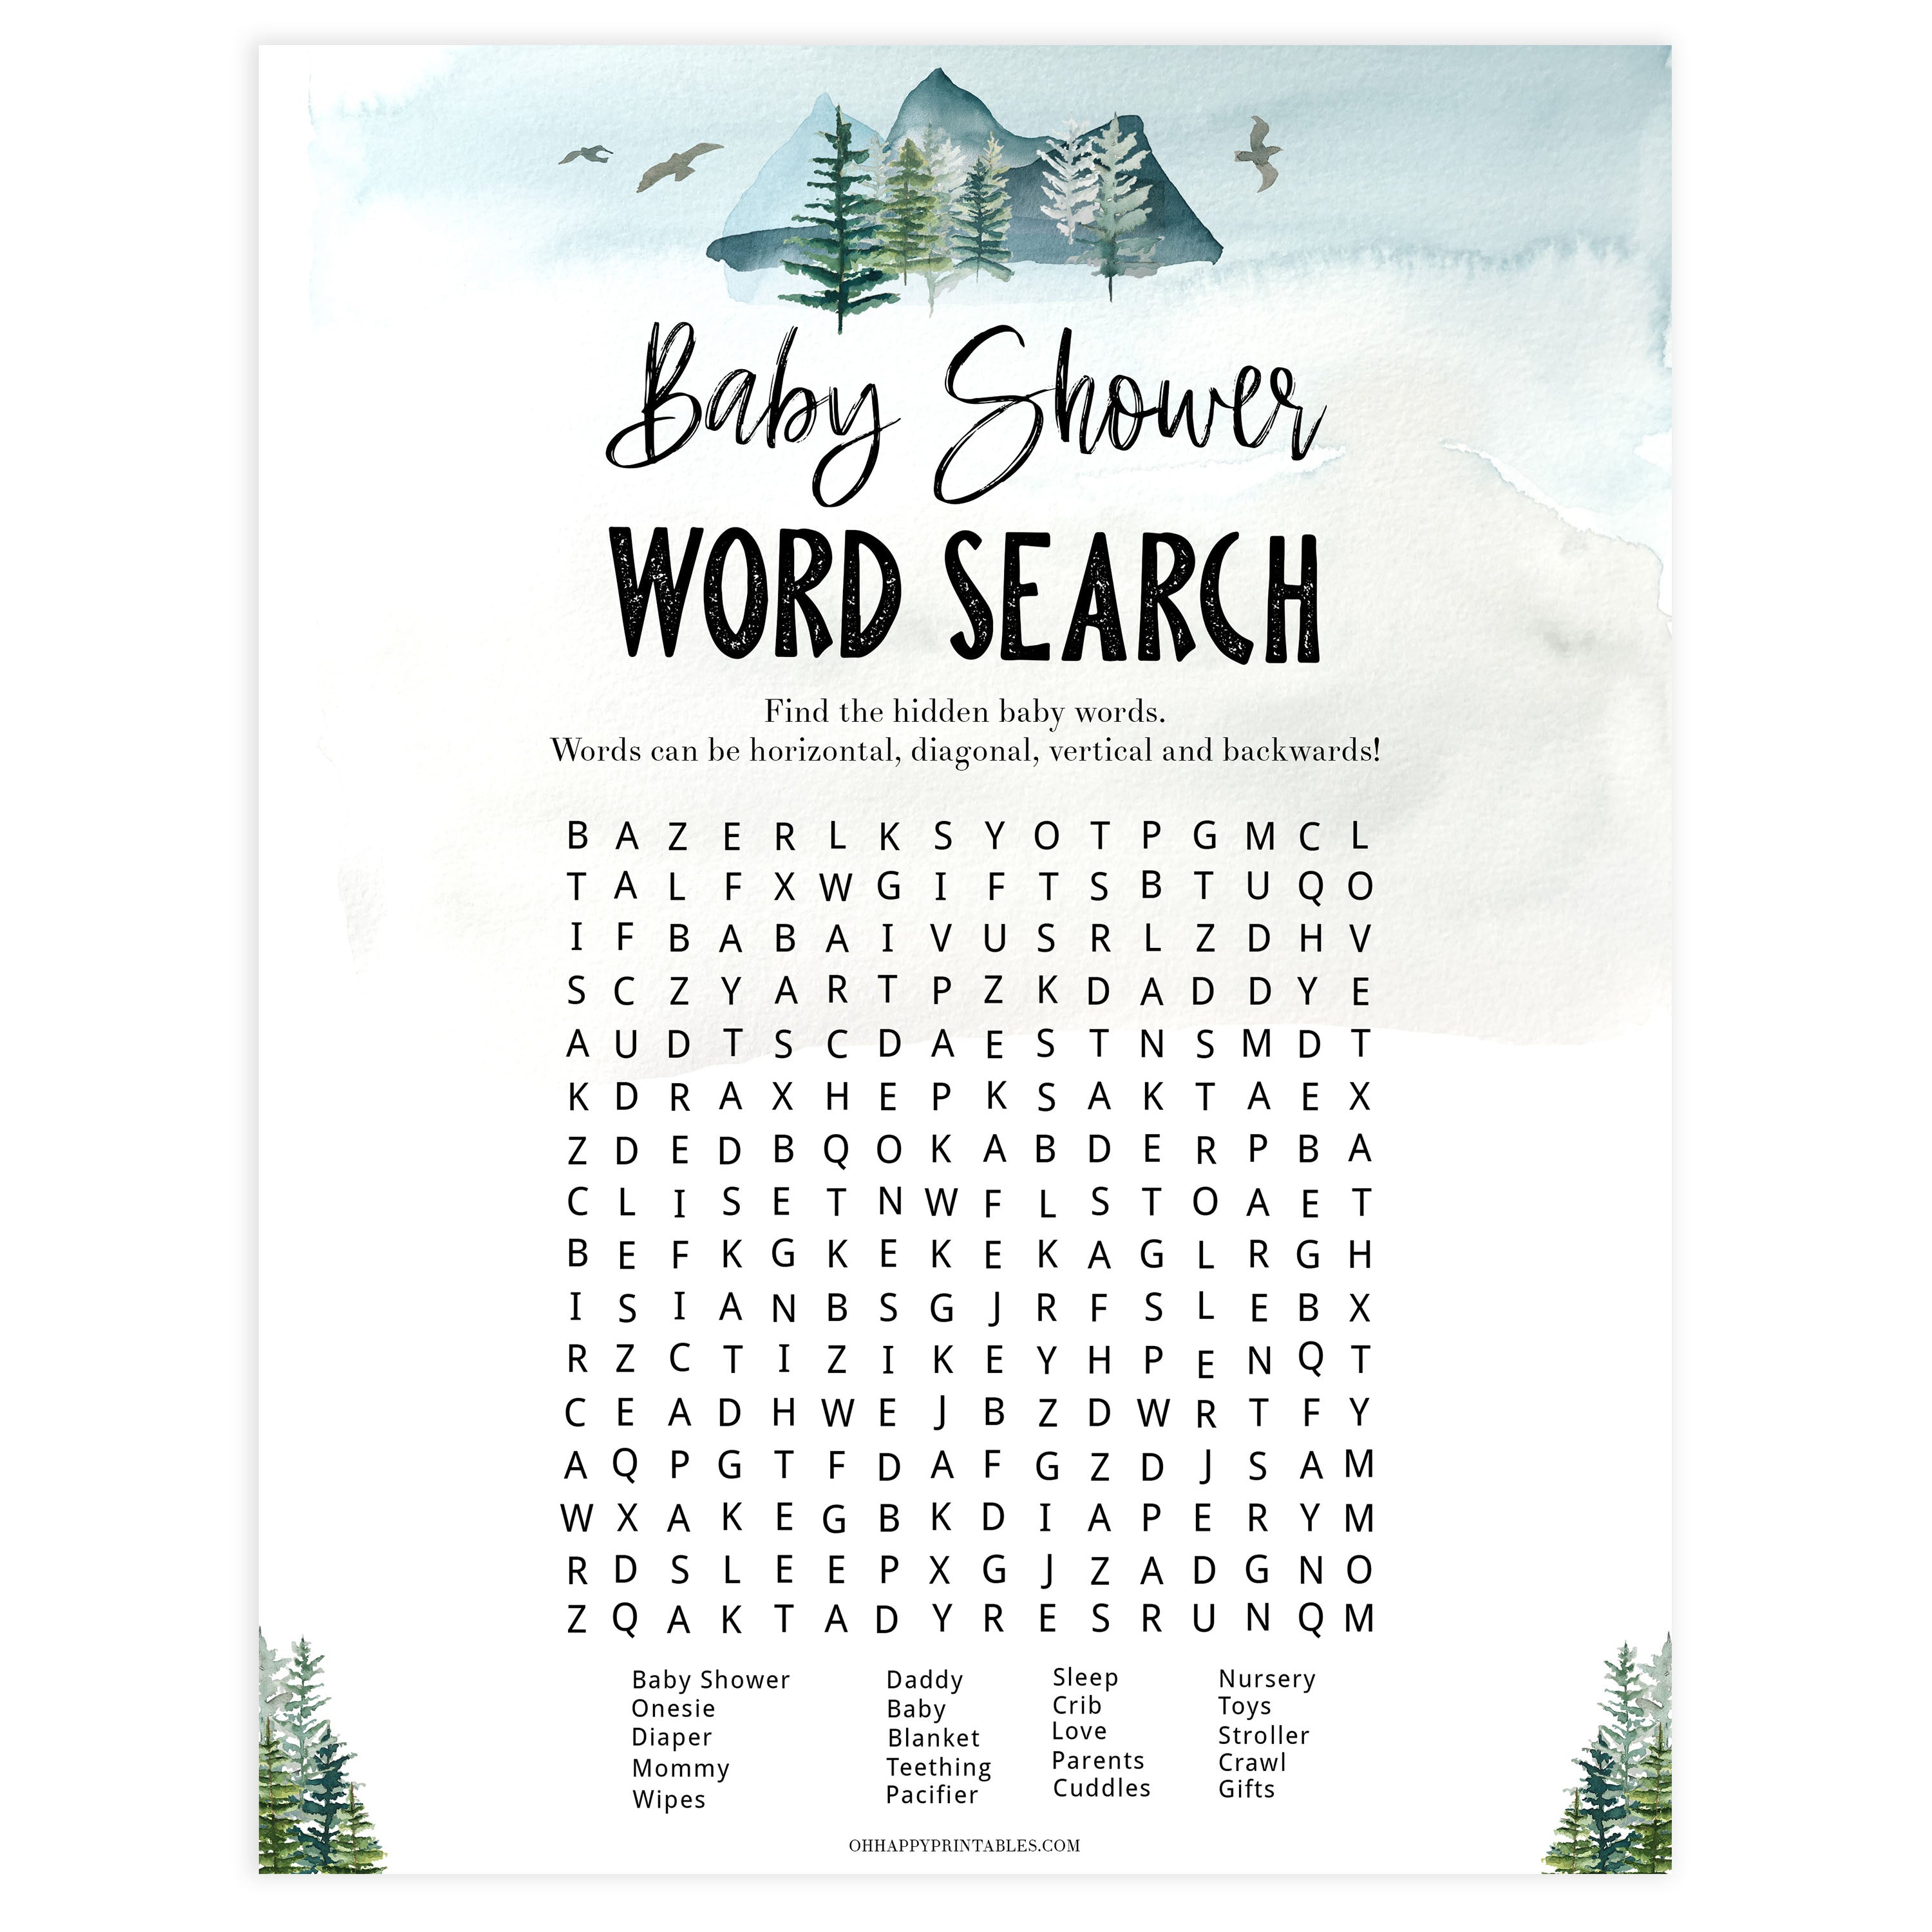 baby shower word search game, Printable baby shower games, adventure awaits baby games, baby shower games, fun baby shower ideas, top baby shower ideas, adventure awaits baby shower, baby shower games, fun adventure baby shower ideas